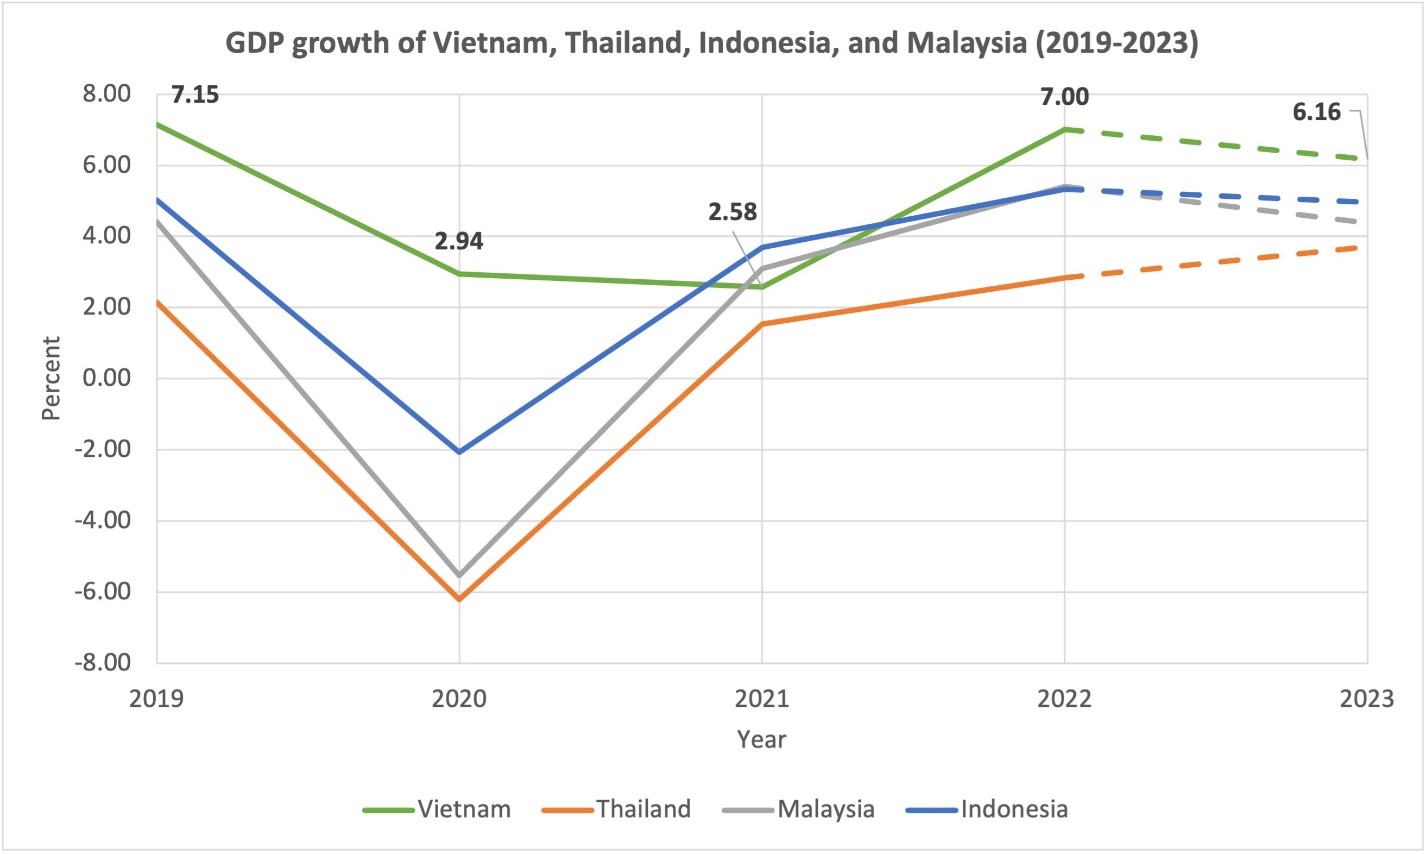 Figure 1. GDP growth of Vietnam, Thailand, Indonesia, and Malaysia (2019-2023) (Source: International Monetary Fund, October 2022)